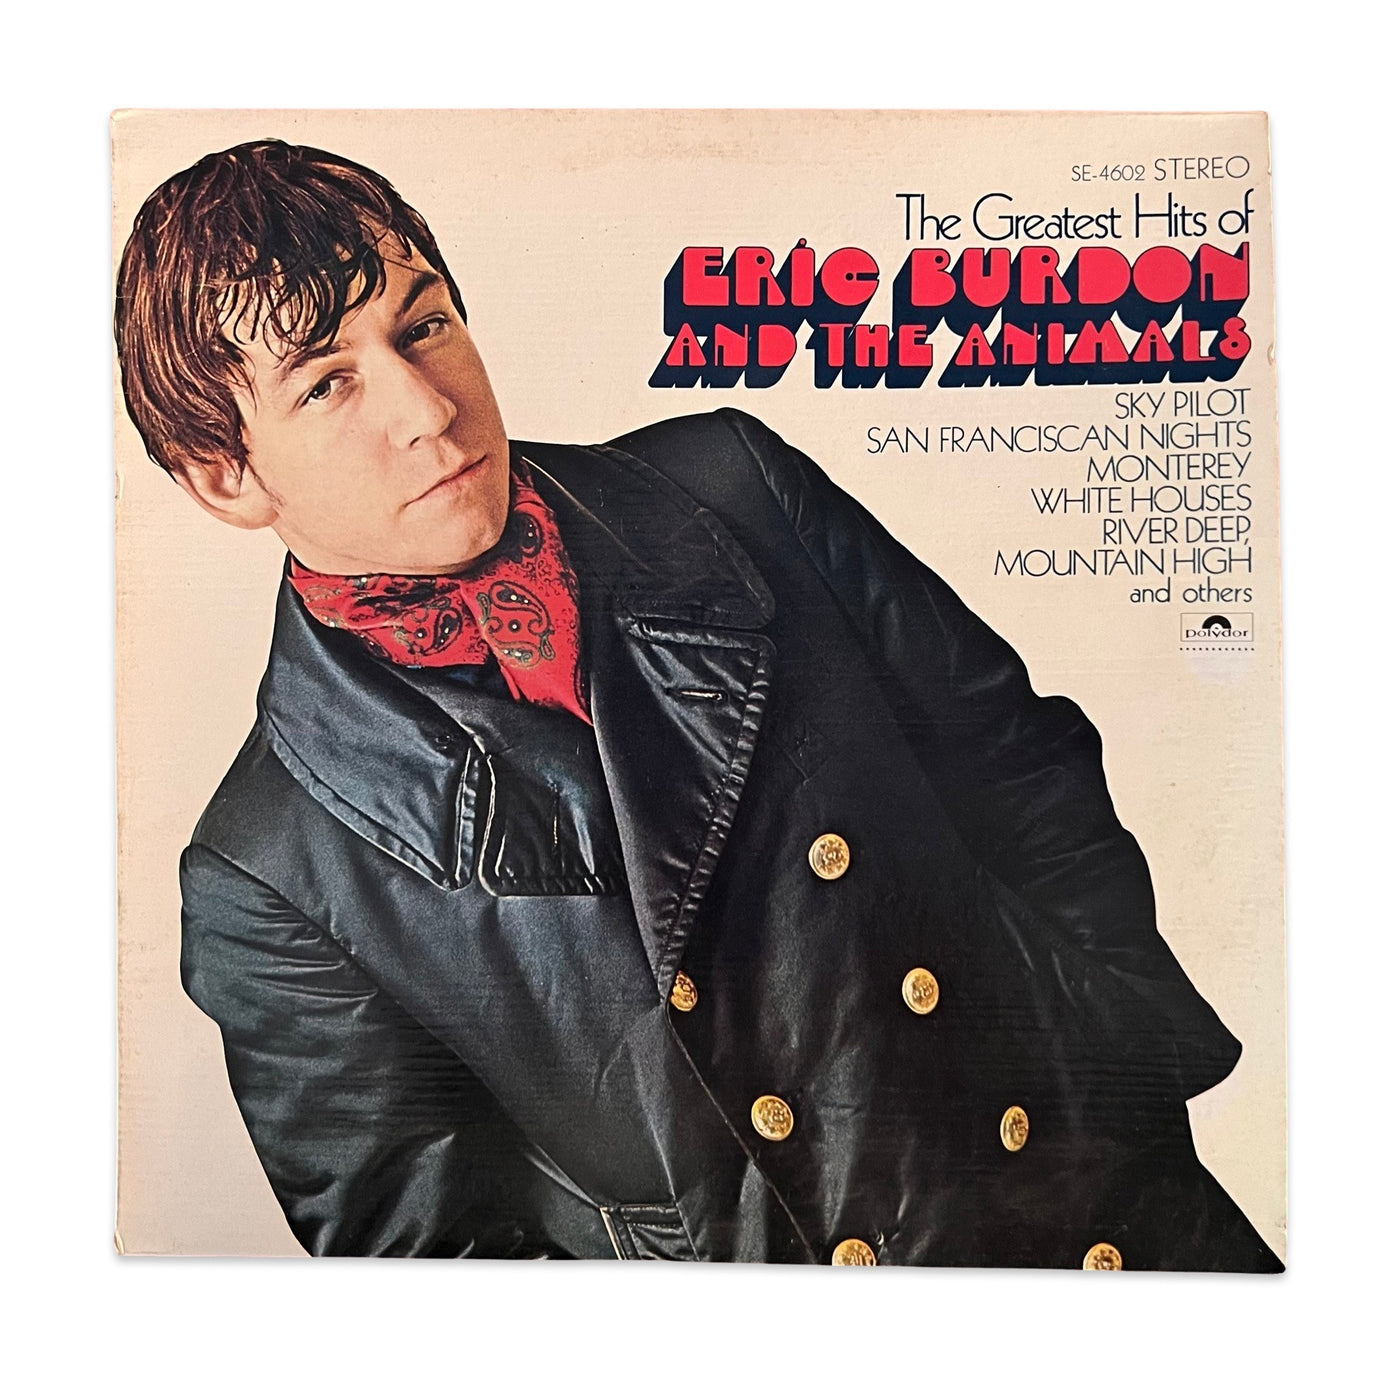 Eric Burdon And The Animals – The Greatest Hits Of Eric Burdon And The Animals